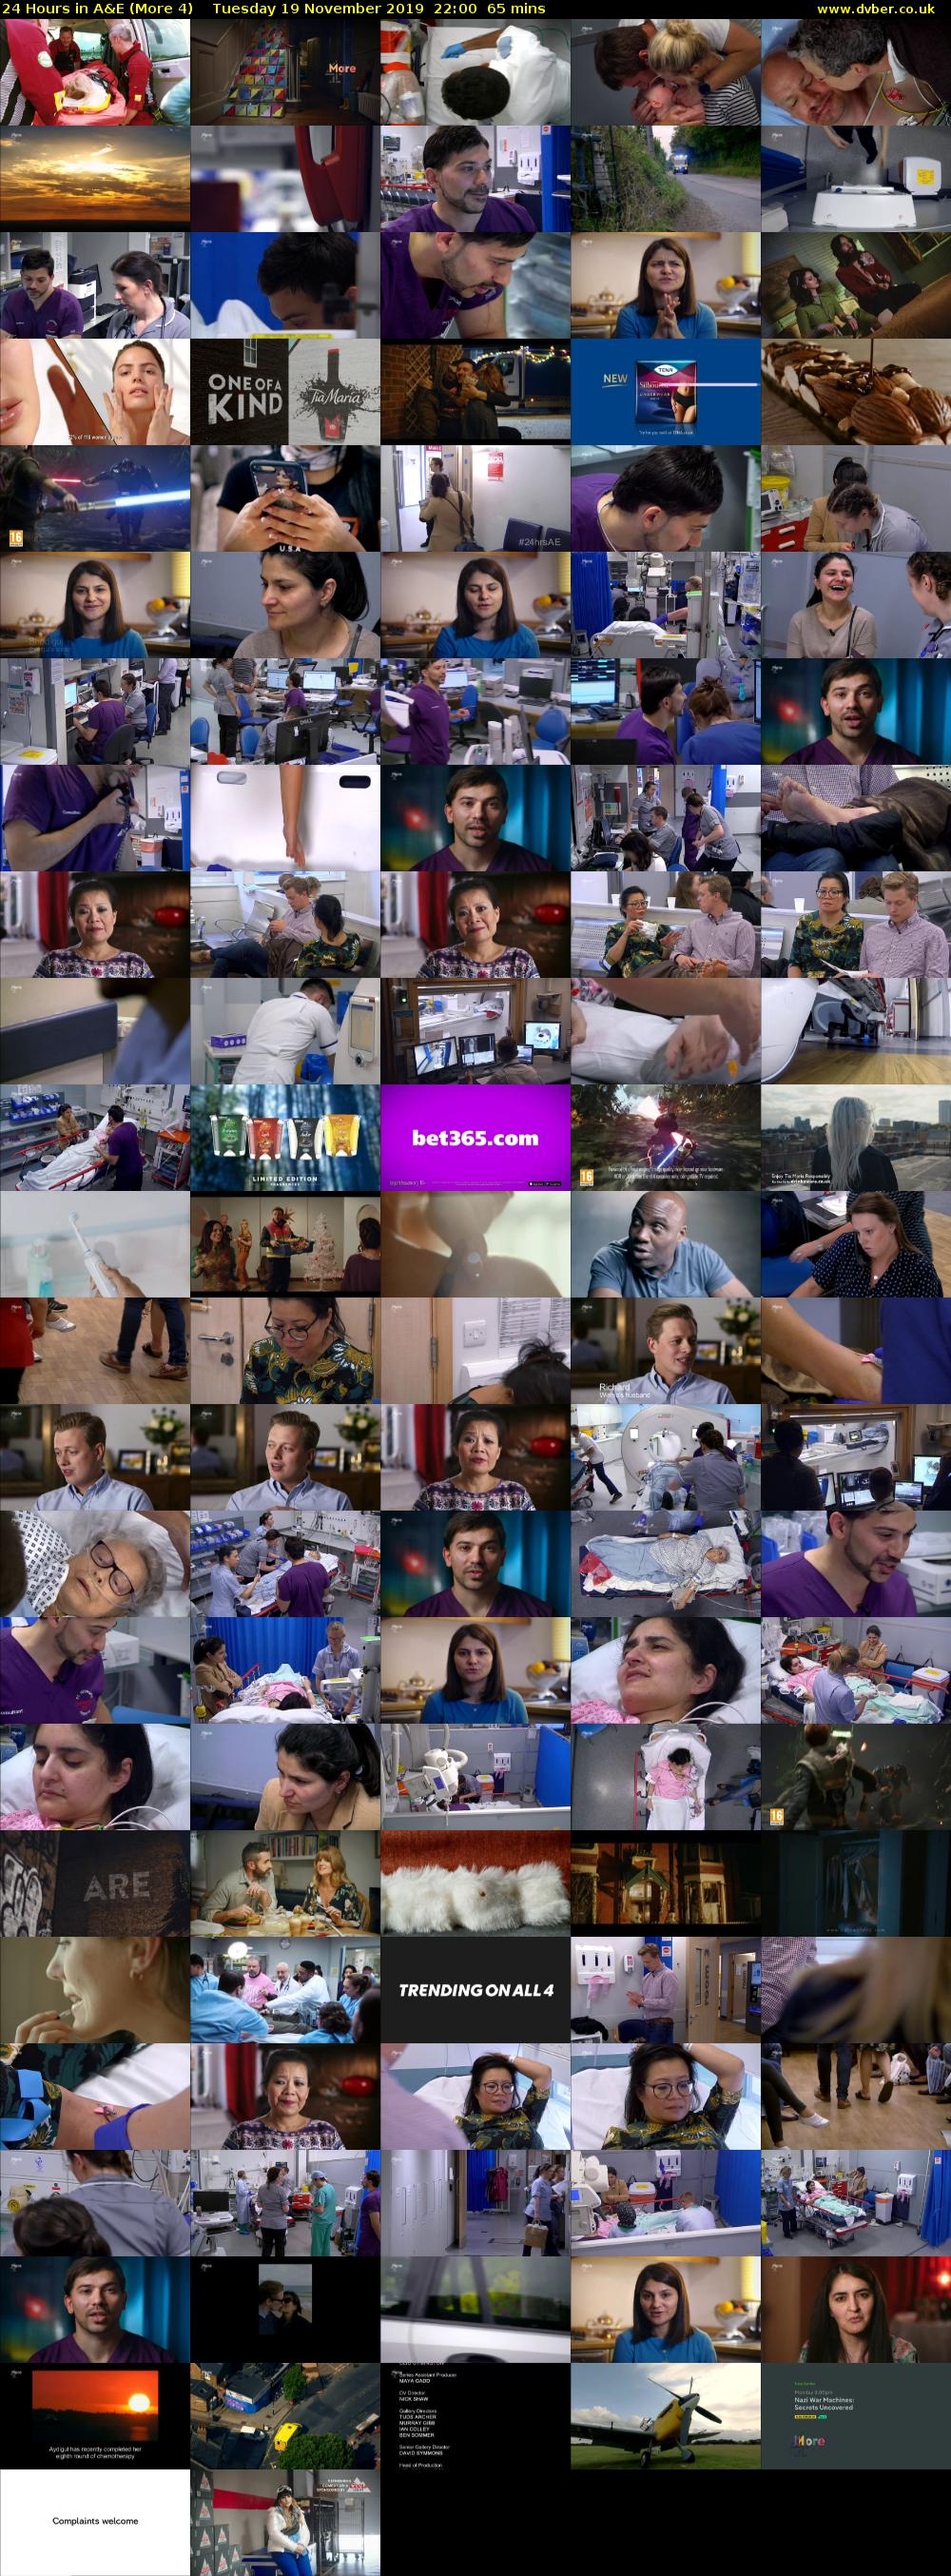 24 Hours in A&E (More 4) Tuesday 19 November 2019 22:00 - 23:05